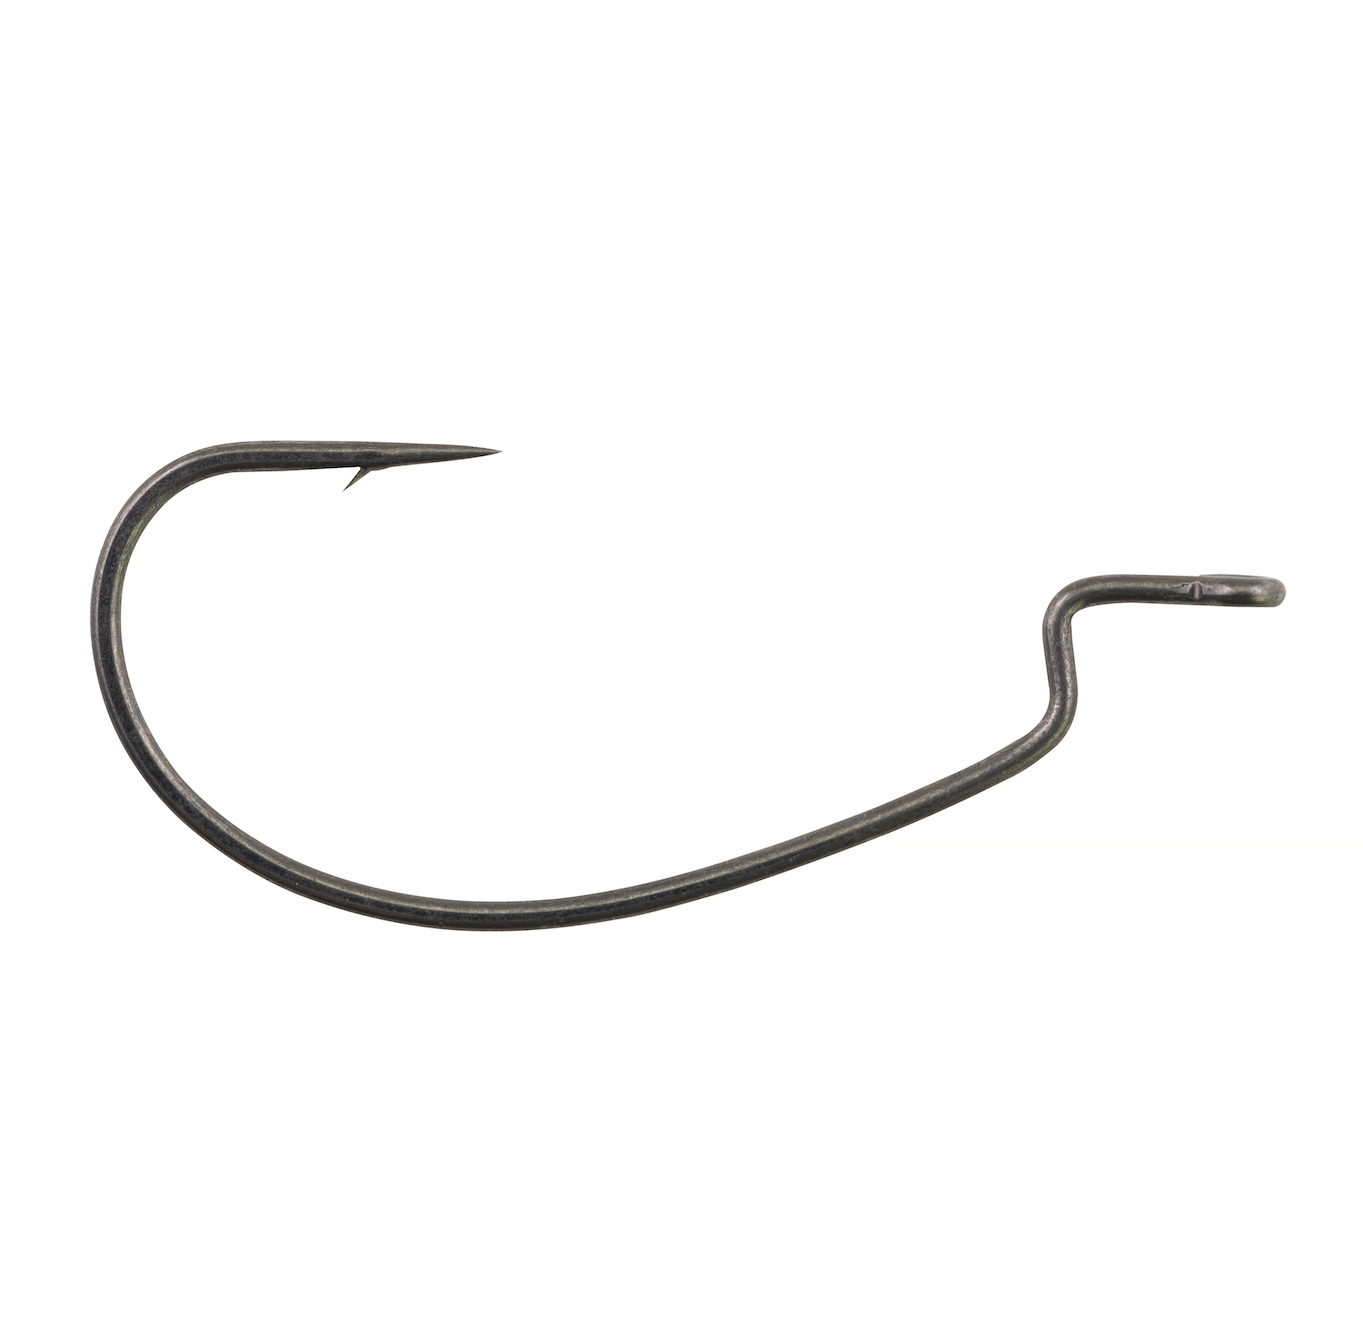 The standard EWG hook is available in #1 through 5/0 sizes and fits the bill for most soft-plastic rigging solutions. Each package comes with seven hooks for $3.99.